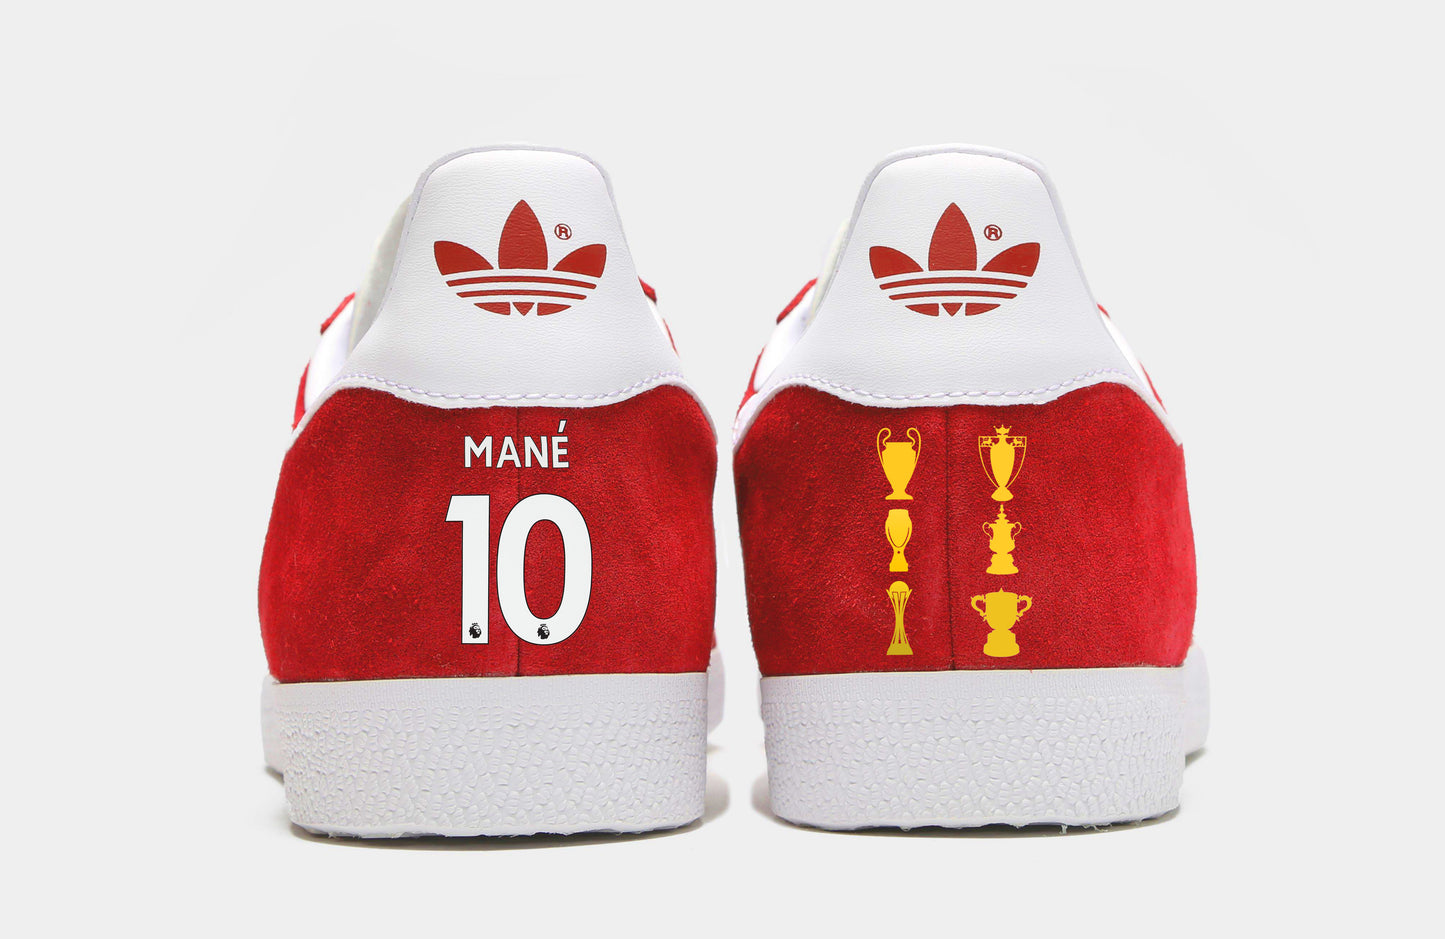 Limited edition Liverpool FC Sadio Mane inspired red / white Adidas custom Gazelle trainers / sneakers